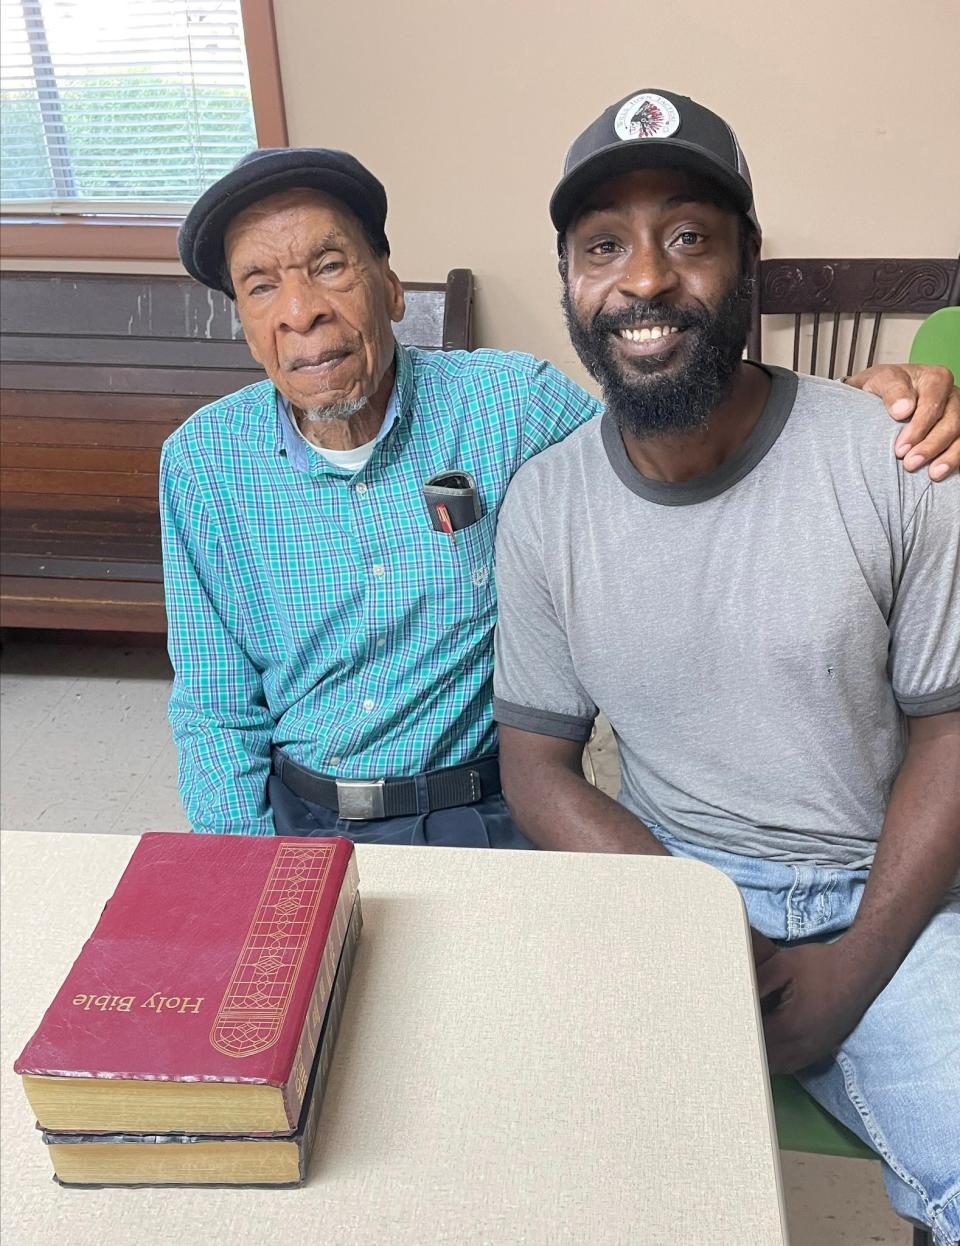 Former Gregory High School educator and current pastor, Owen “O.J.” Ford, left, and Timothy "Cas" Smith discuss the history of the school at Collins United Methodist Church in Collinsville, Alabama, on June 28, 2023.